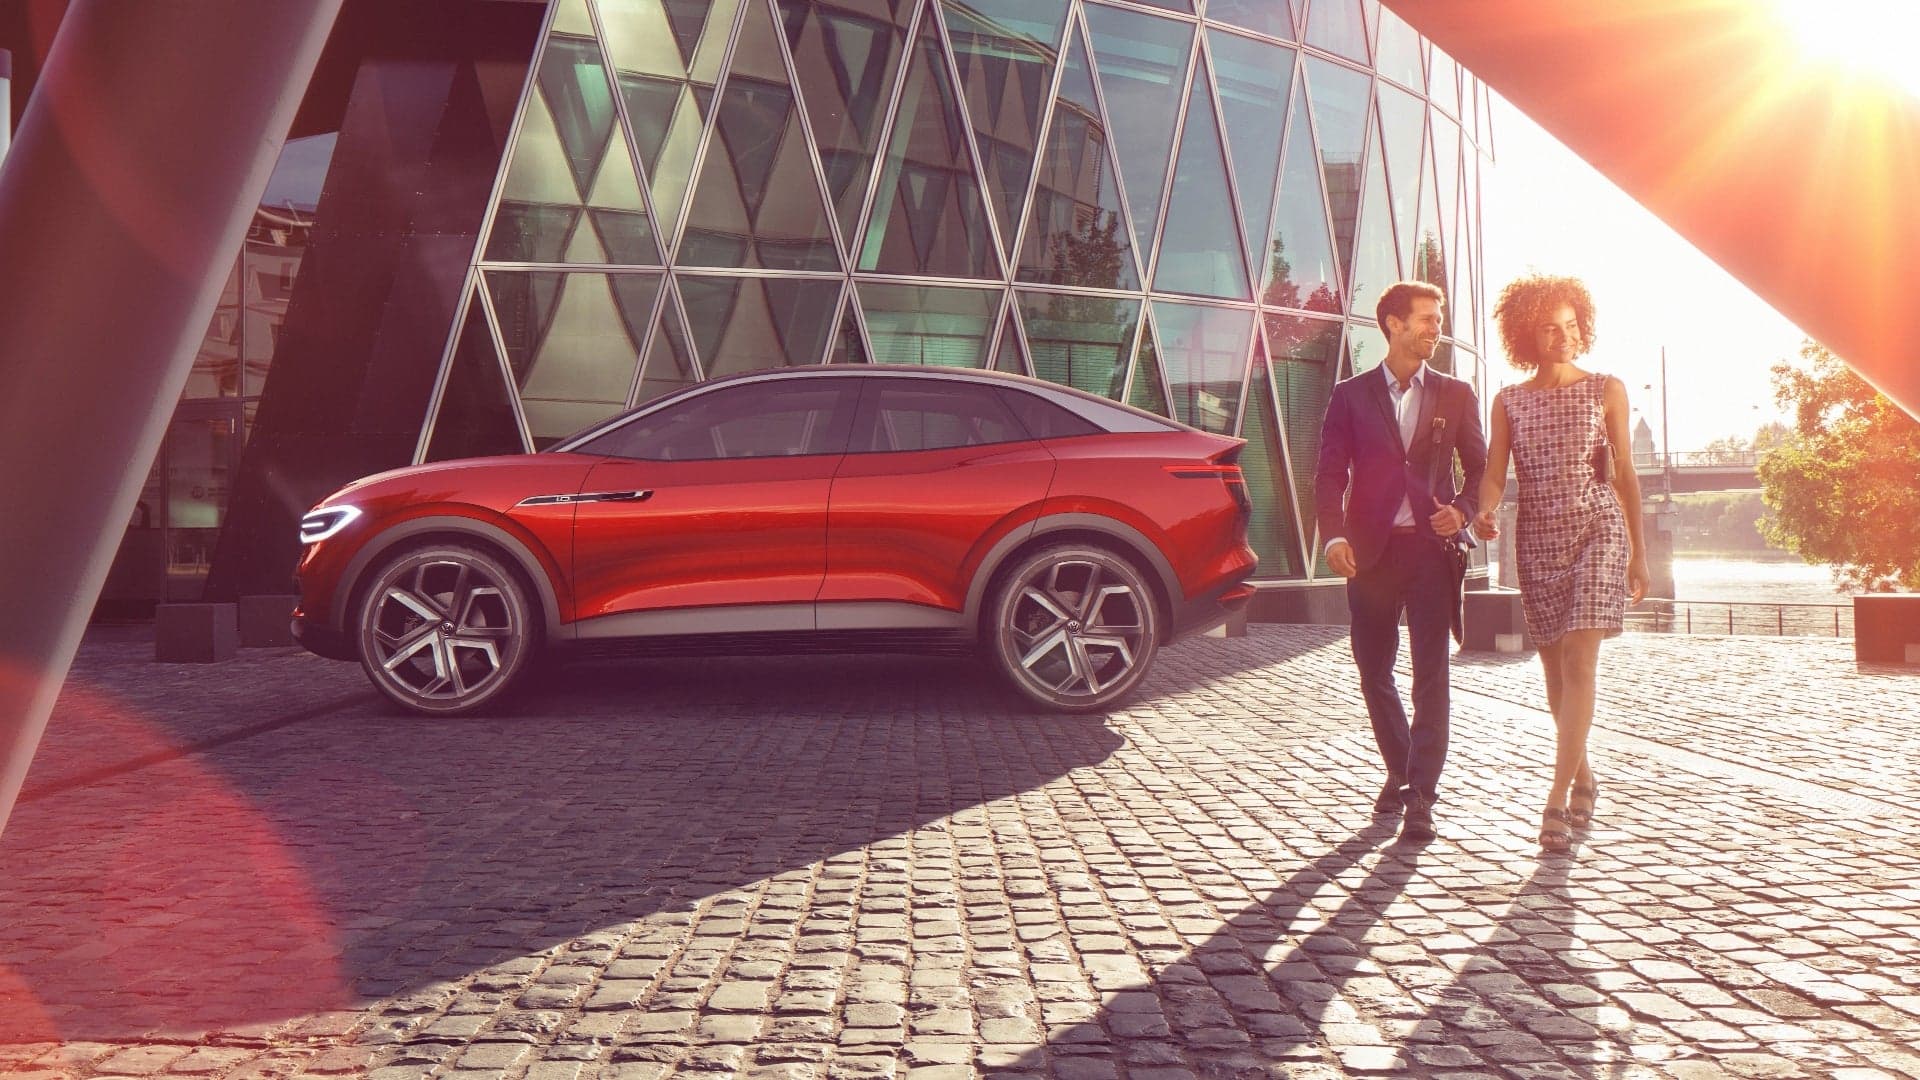 Volkswagen EV Crossover Based On I.D. Crozz Concept Coming to the U.S. in 2020